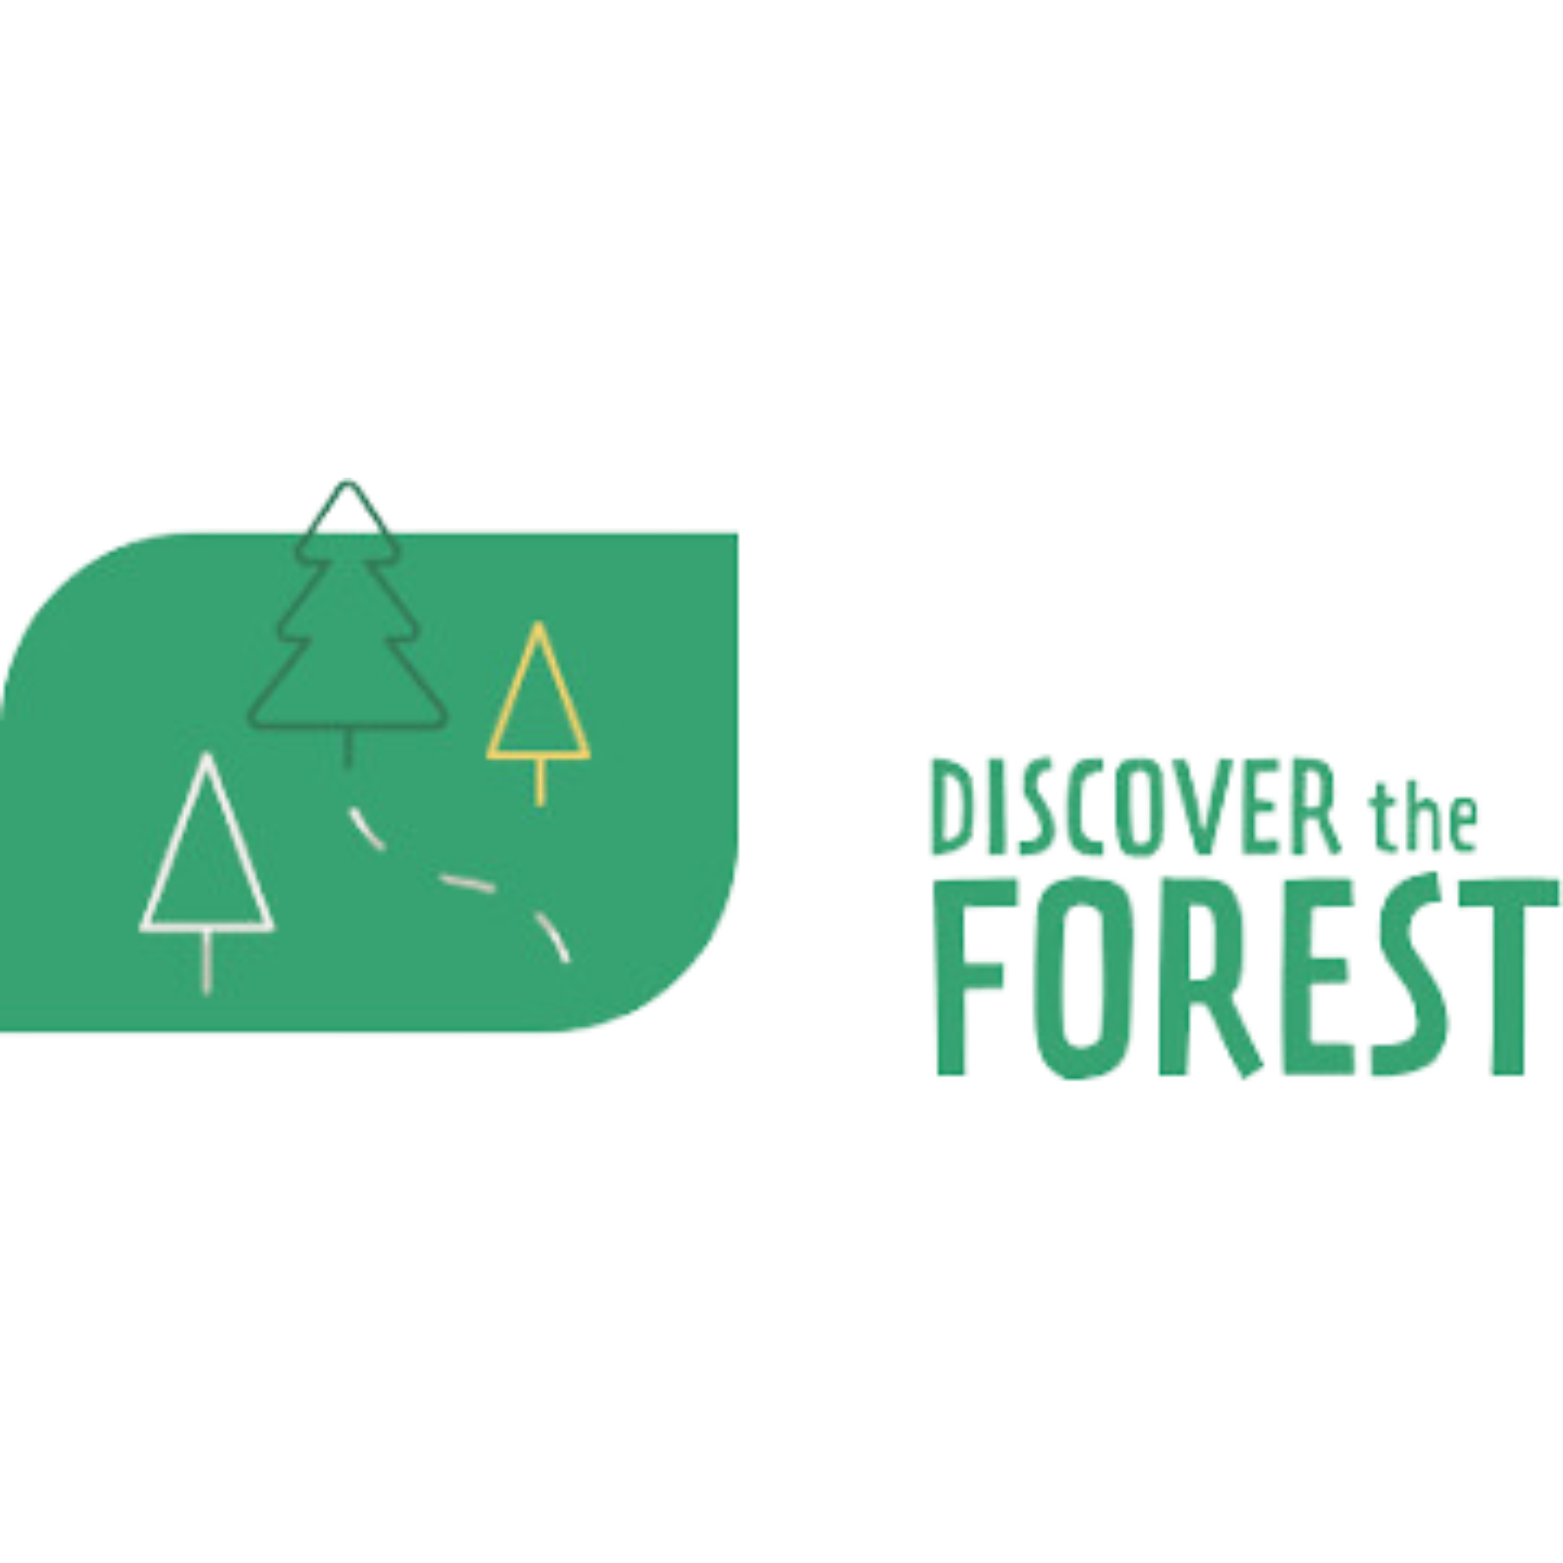 Discover the Forest